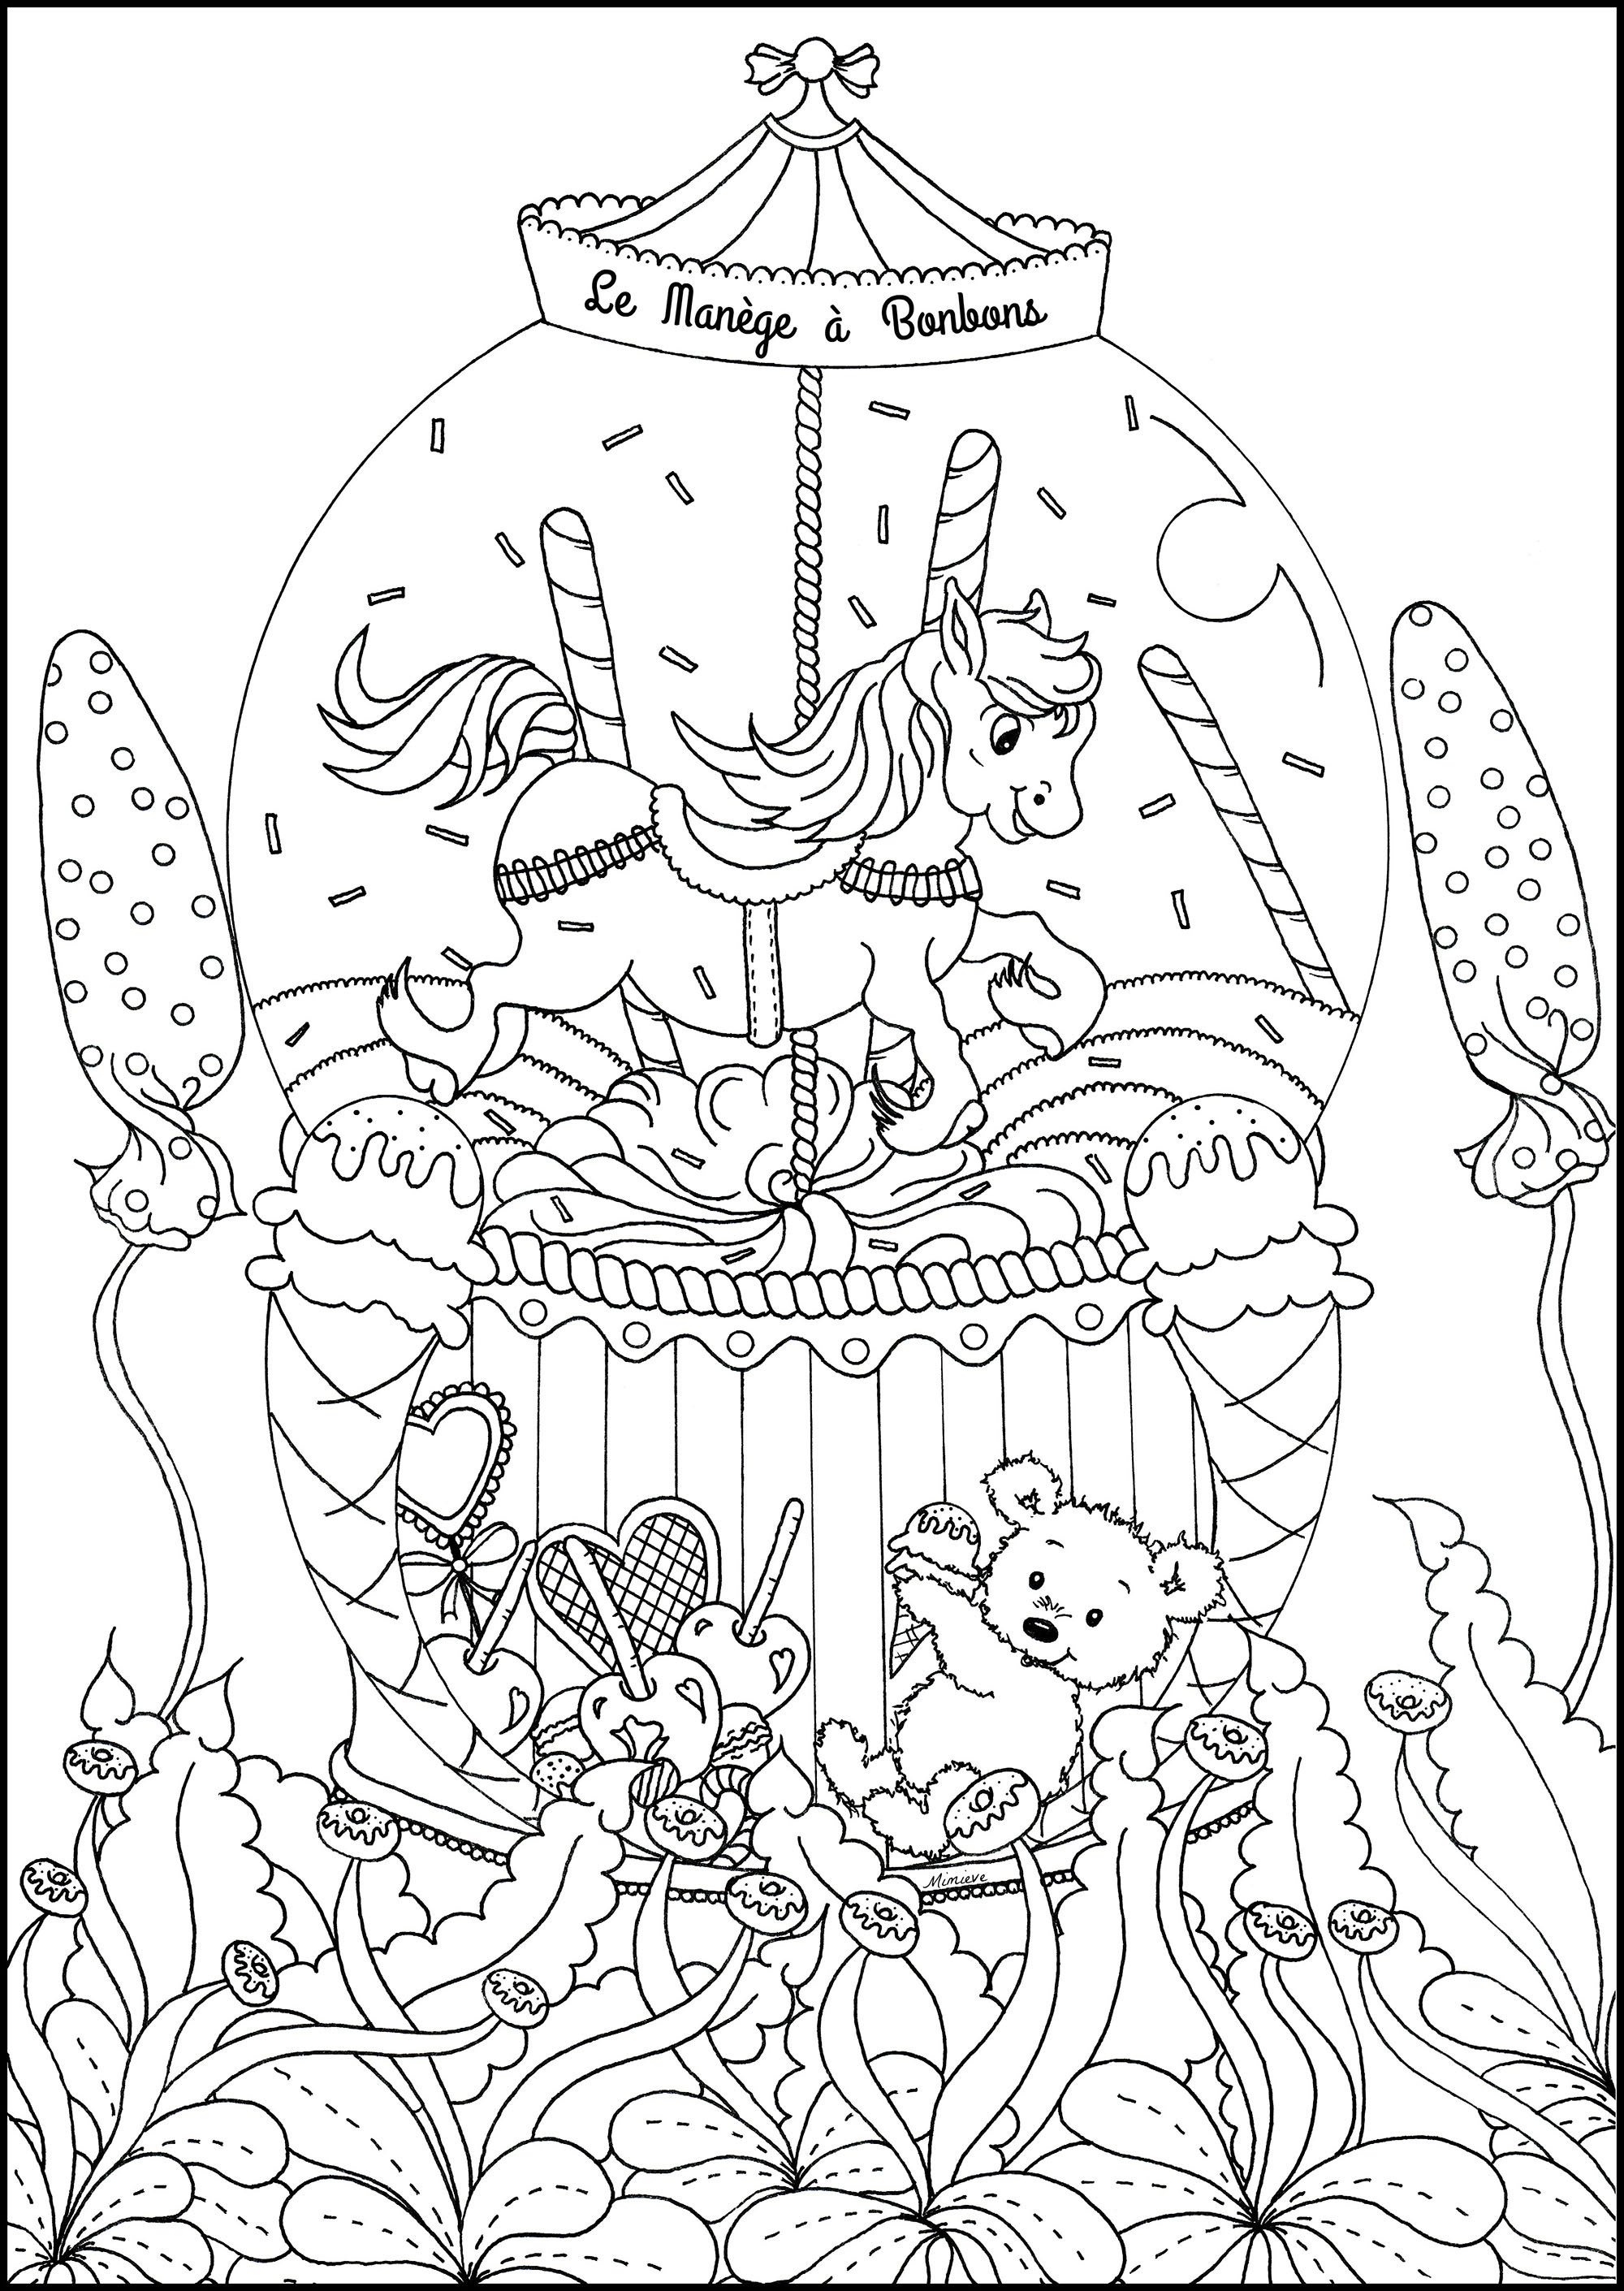 The candy carousel - Return to childhood Adult Coloring Pages